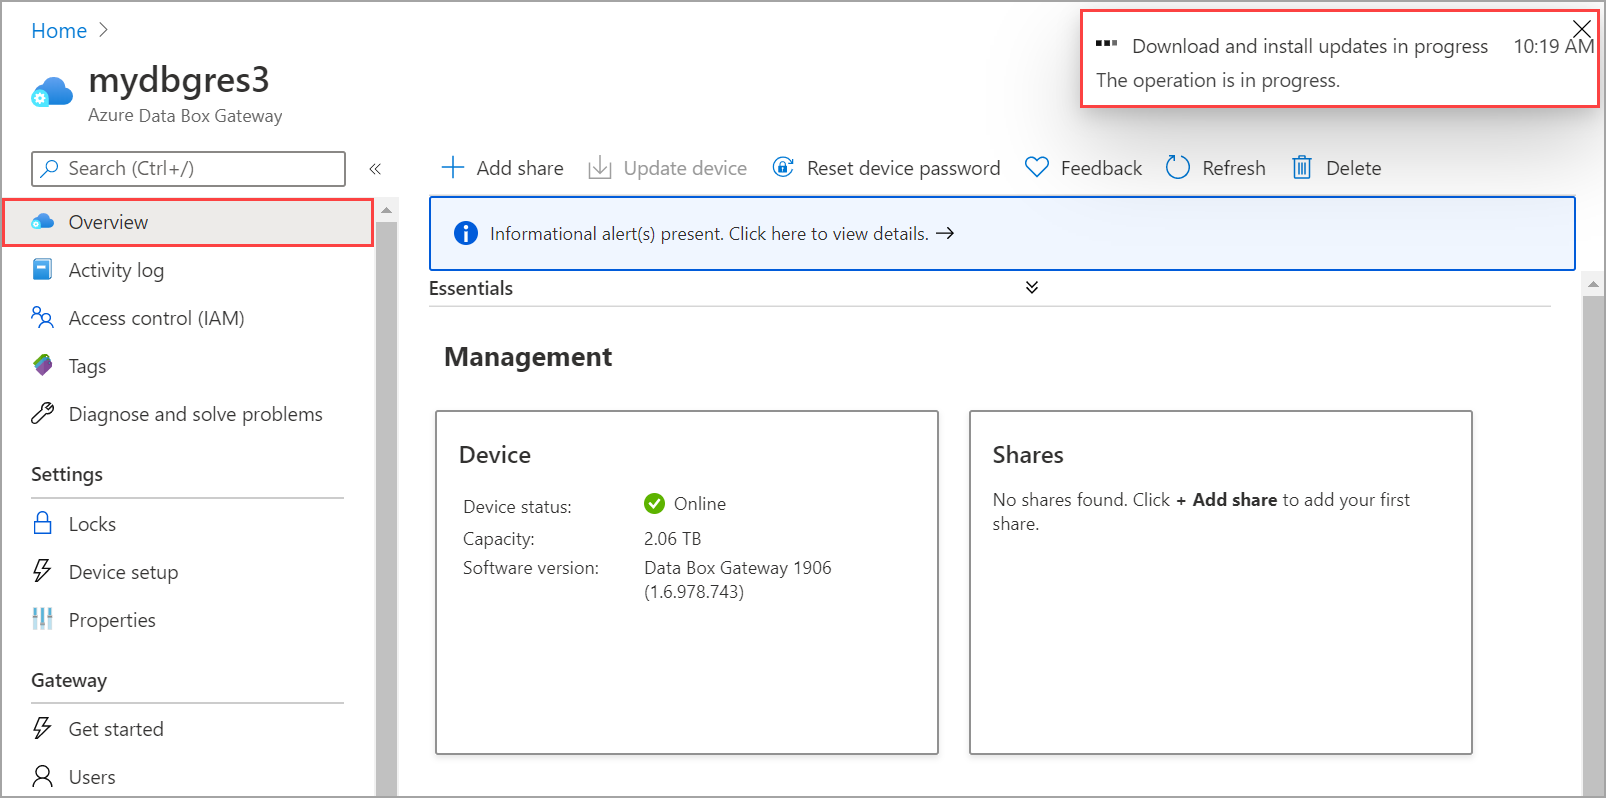 Screenshot of the Azure Data Box Gateway Home page with the Overview option and the Download and install progress message called out.